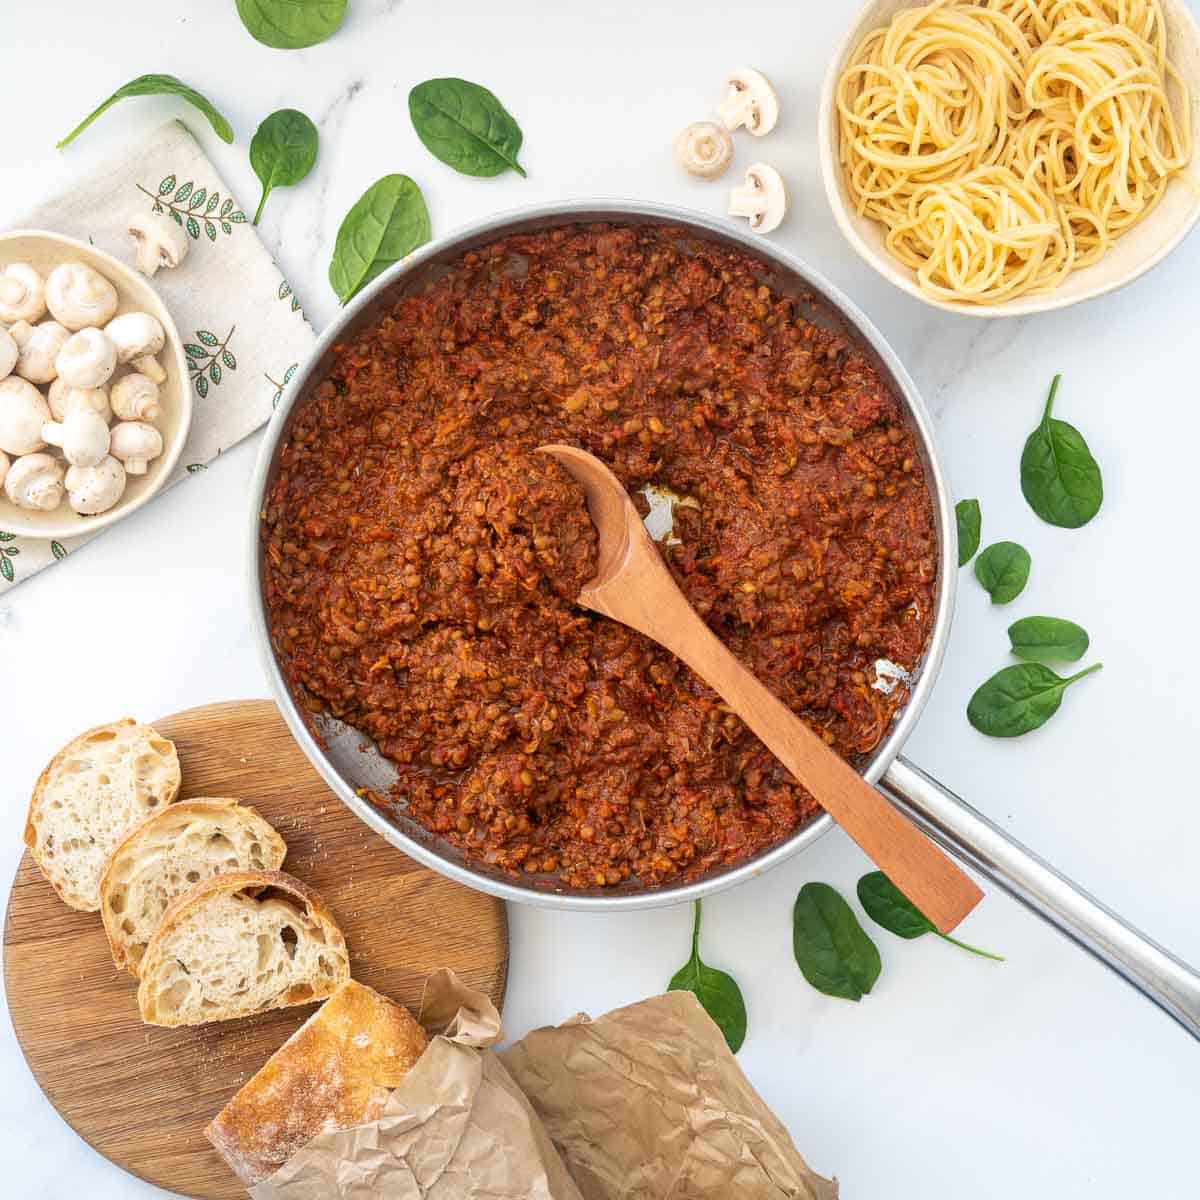 A lentil based pasta sauce in a large fry pan with bread and cooked spaghetti. 